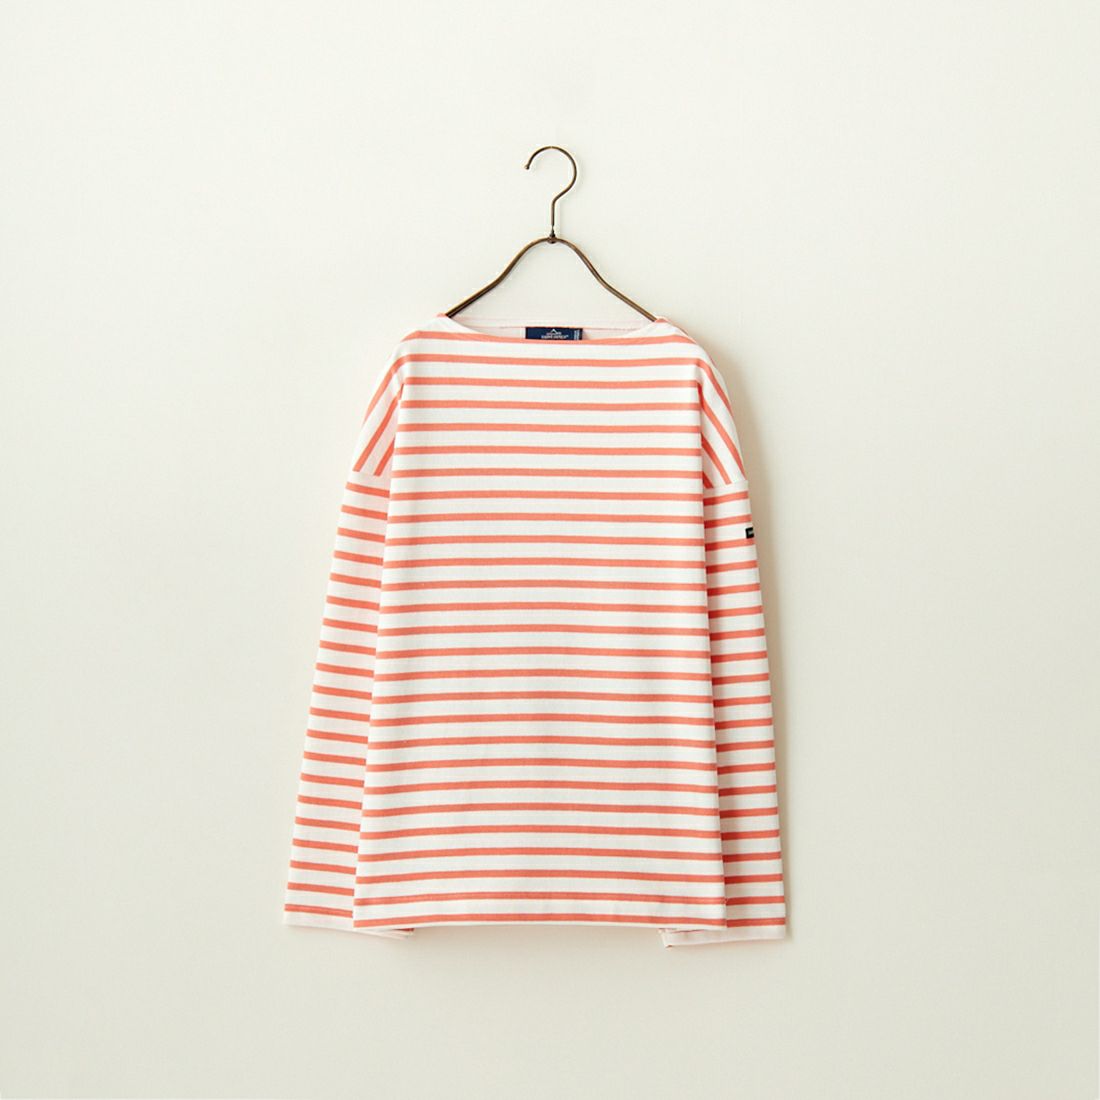 ST.JAMES [セントジェームス] 厚手ルーズドロップTシャツ [20JC-OUESS-LOOSE] NEI/FRE